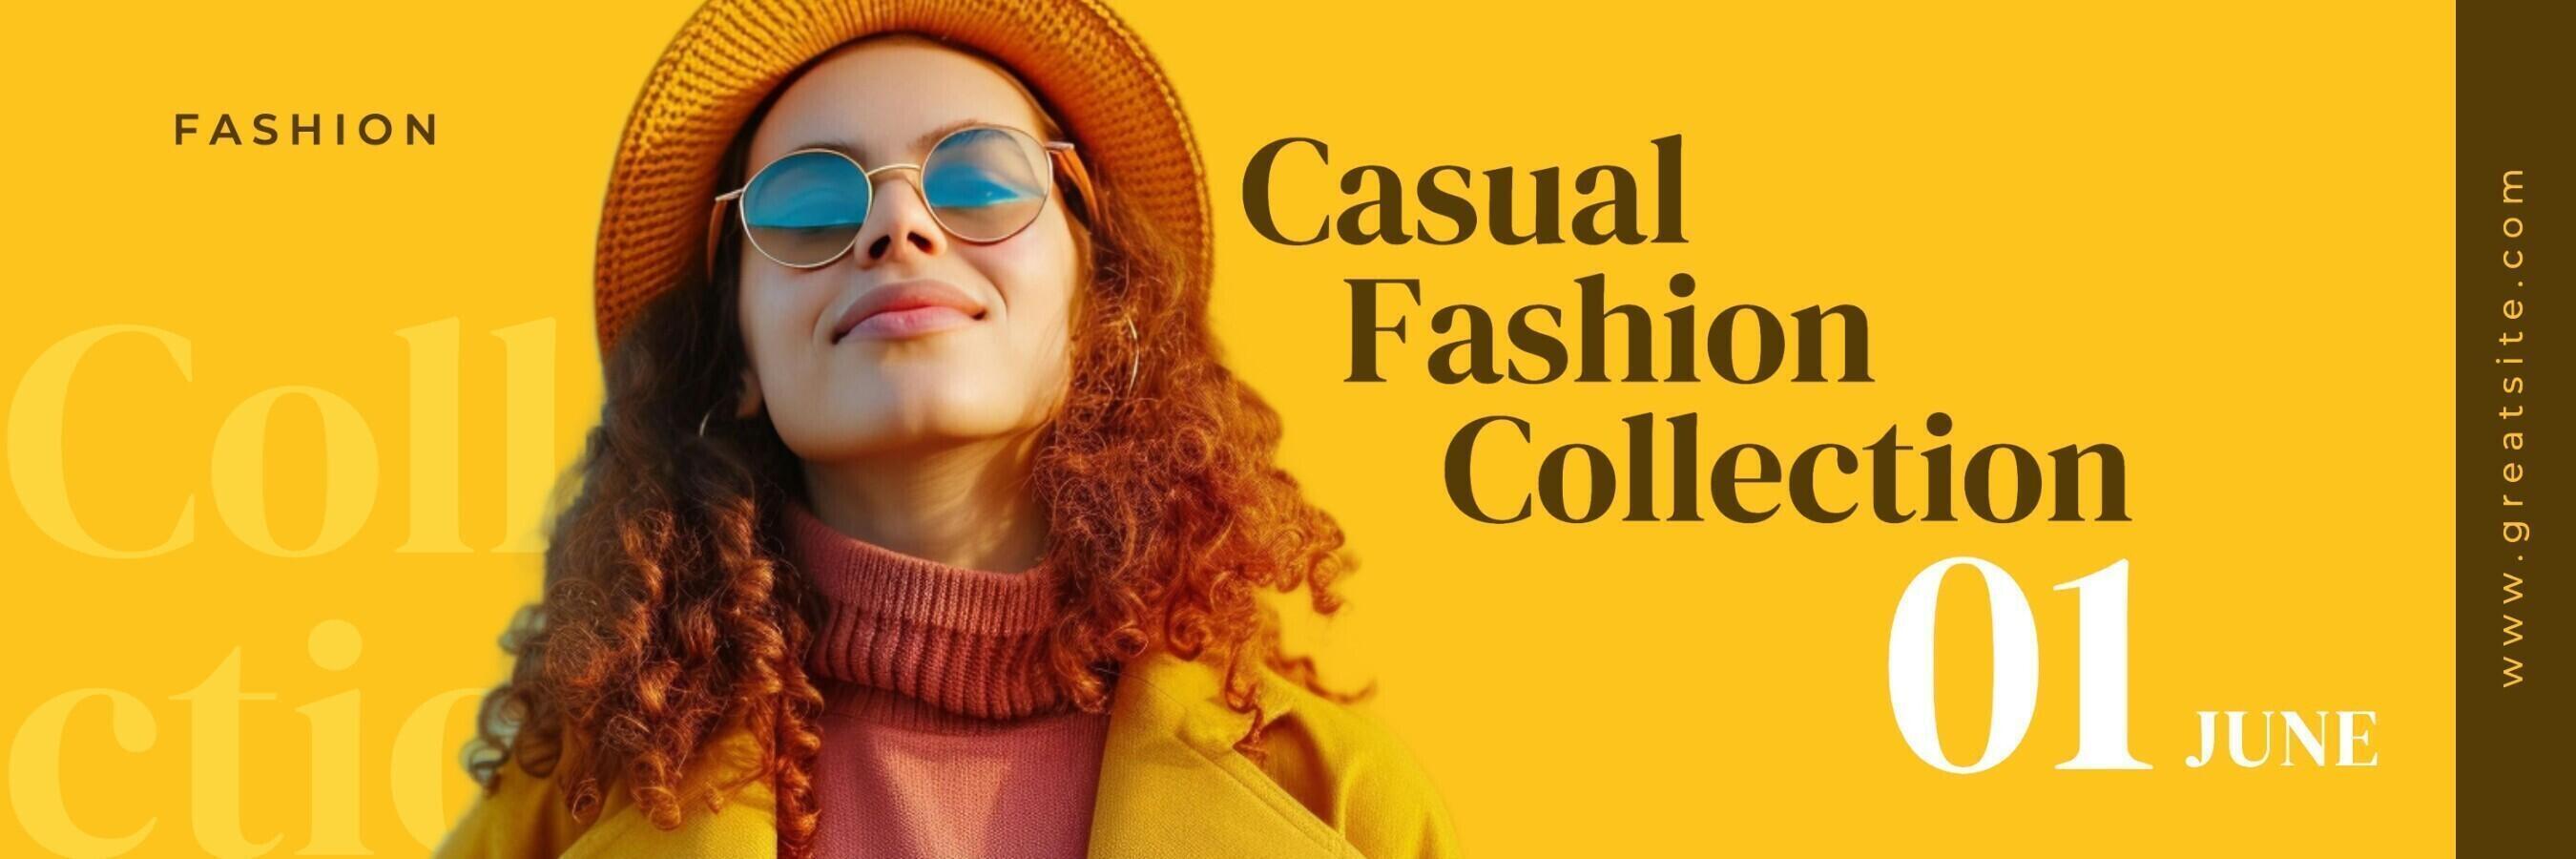 Yellow Minimalist Fashion Collection Twitter Banner template